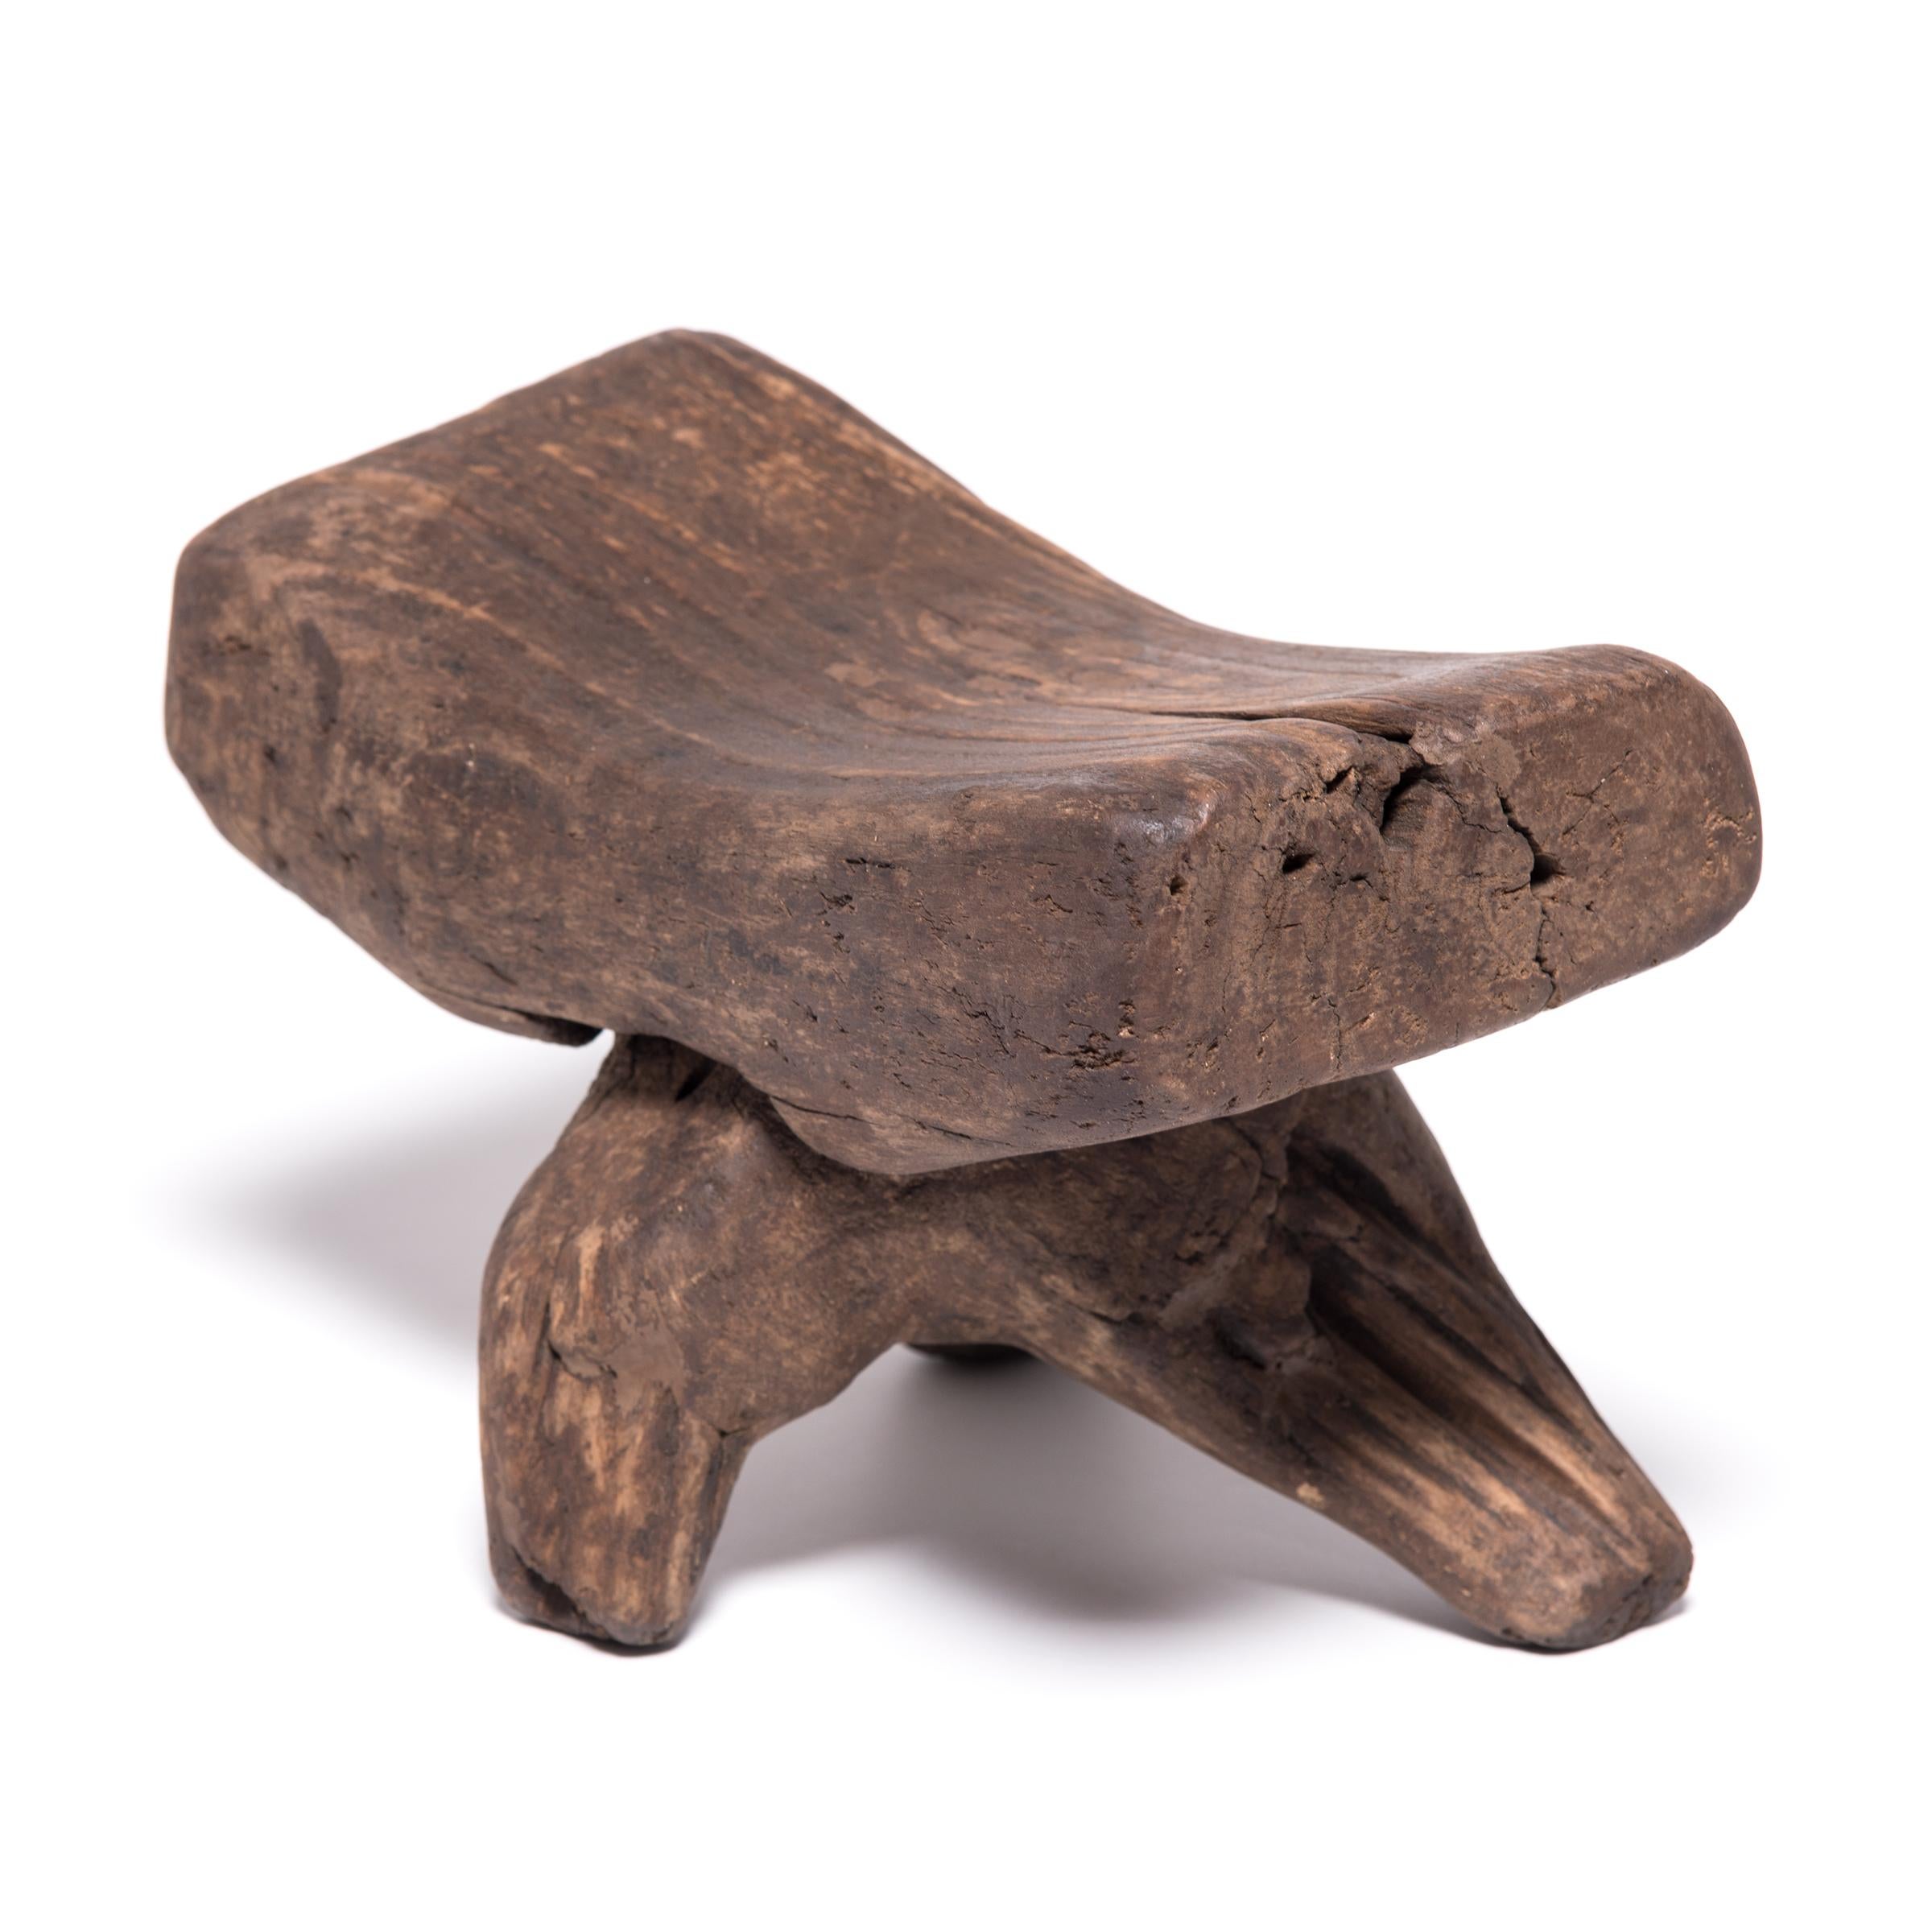 So as not to muss her intricate hairstyle, an upper-class woman once laid her head on this walnut headrest. Deviating from more finished varieties, this 19th century headrest has a sculptural, almost free form shape. Perhaps emulating the twisted